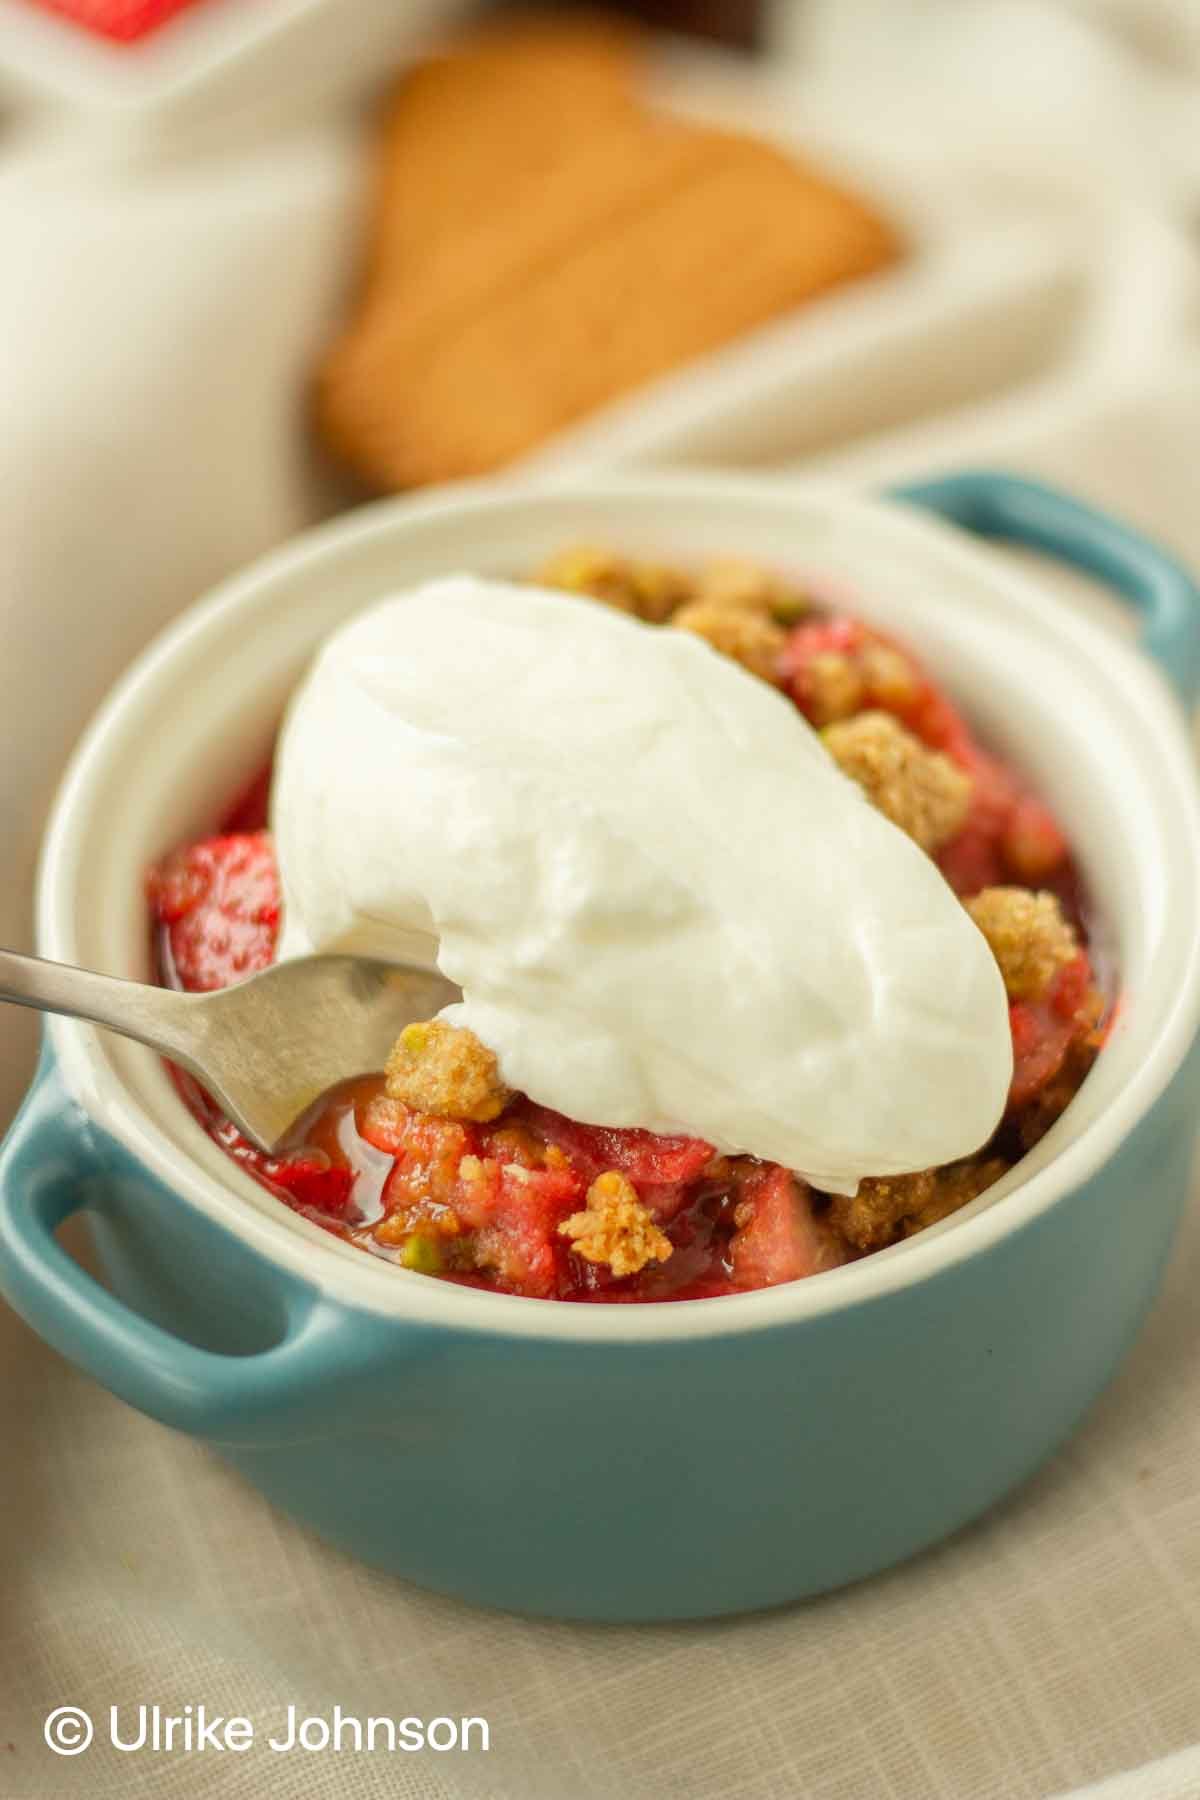 a serving of strawberry rhubarb crumble served with a dollop of whipped cream in a small blue baking dish